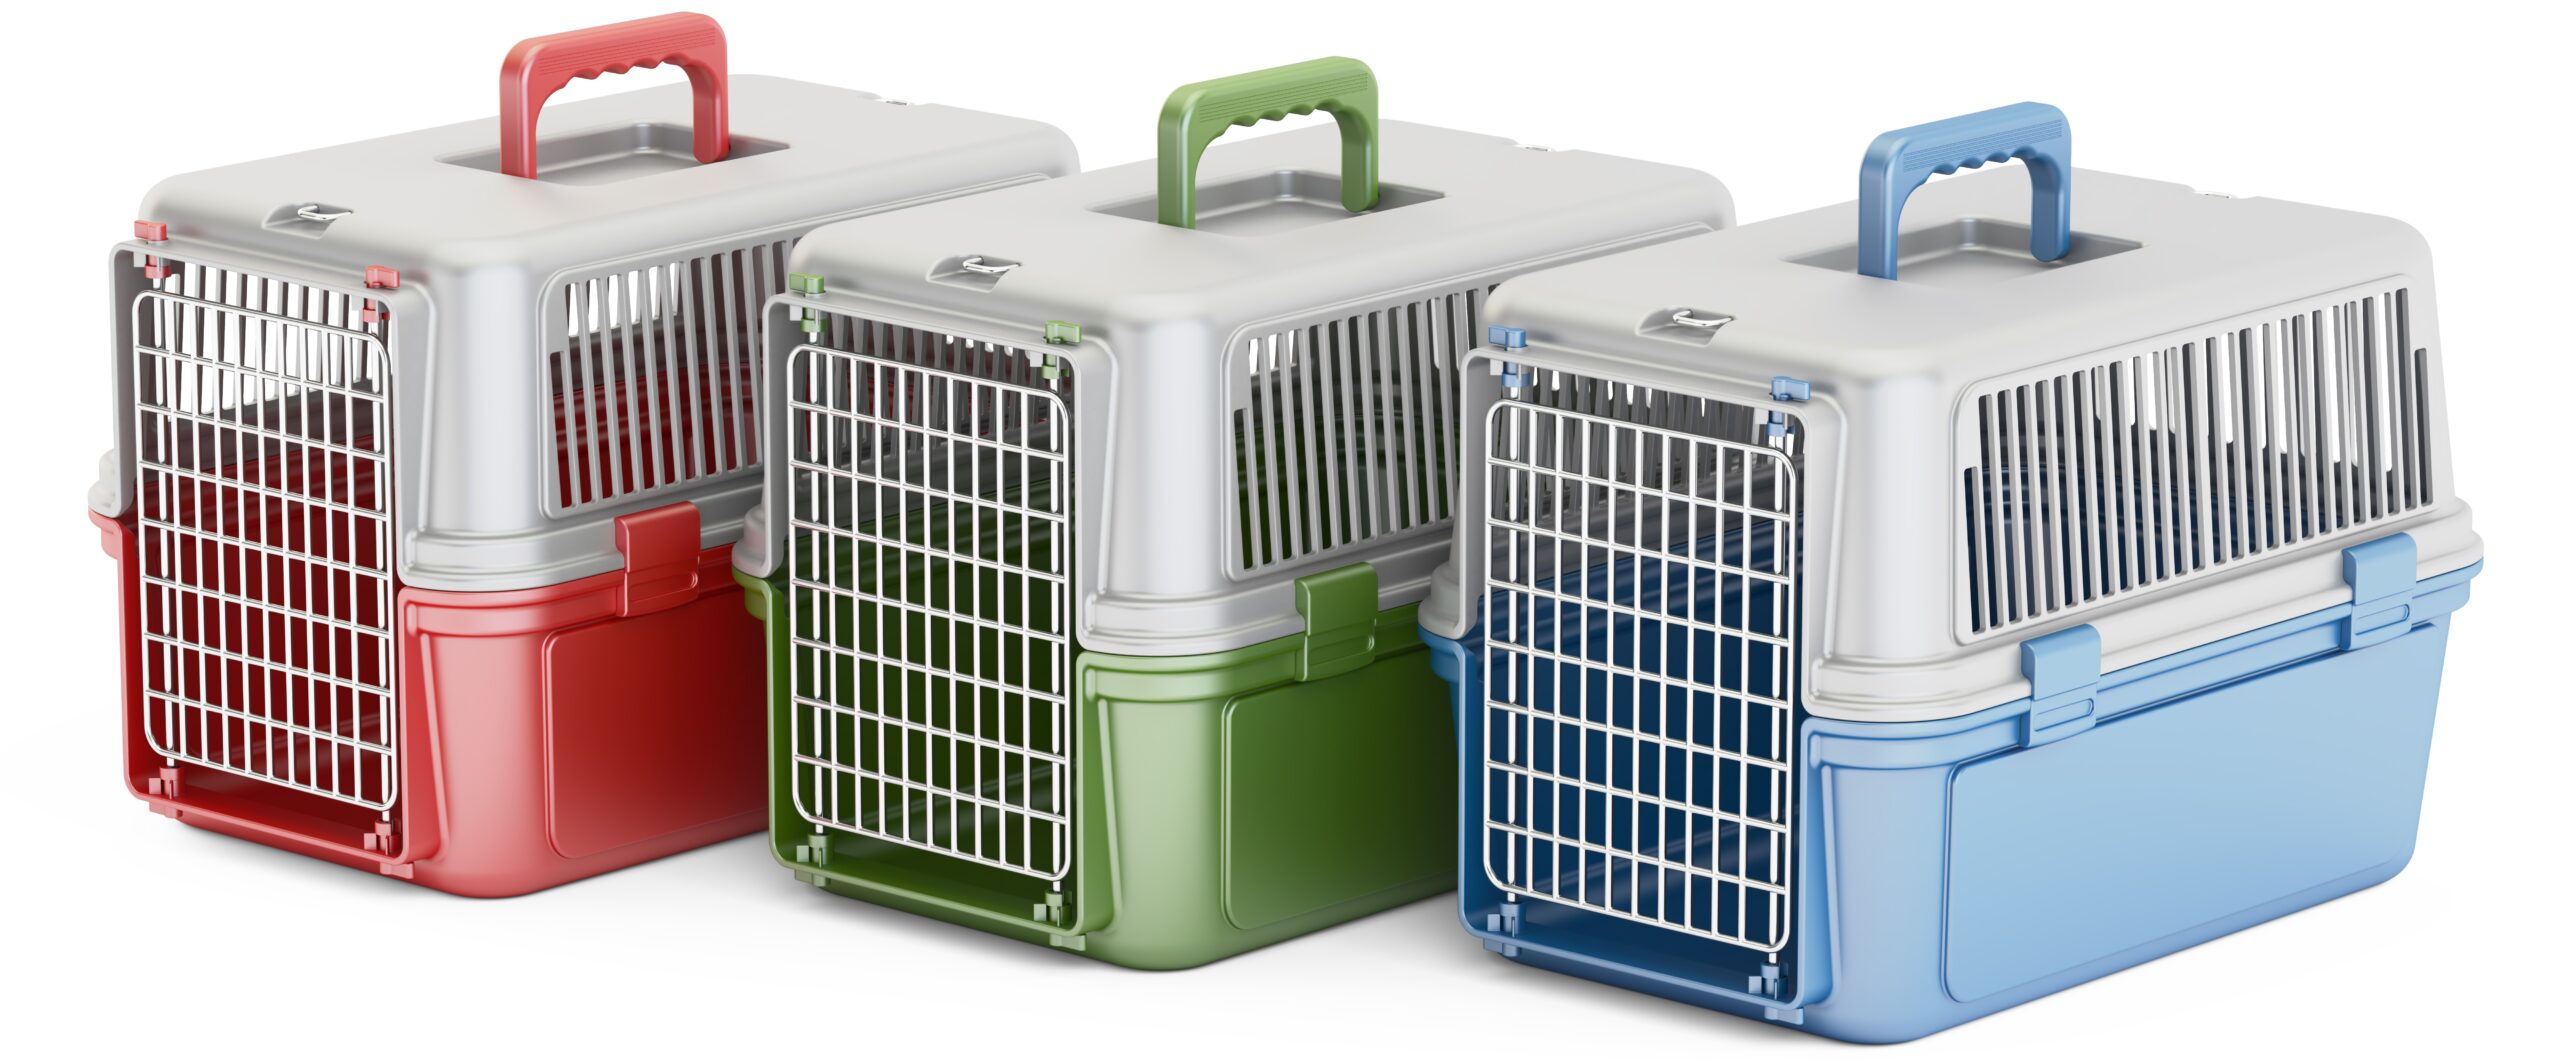 Best types of crates for Daisy Dogs